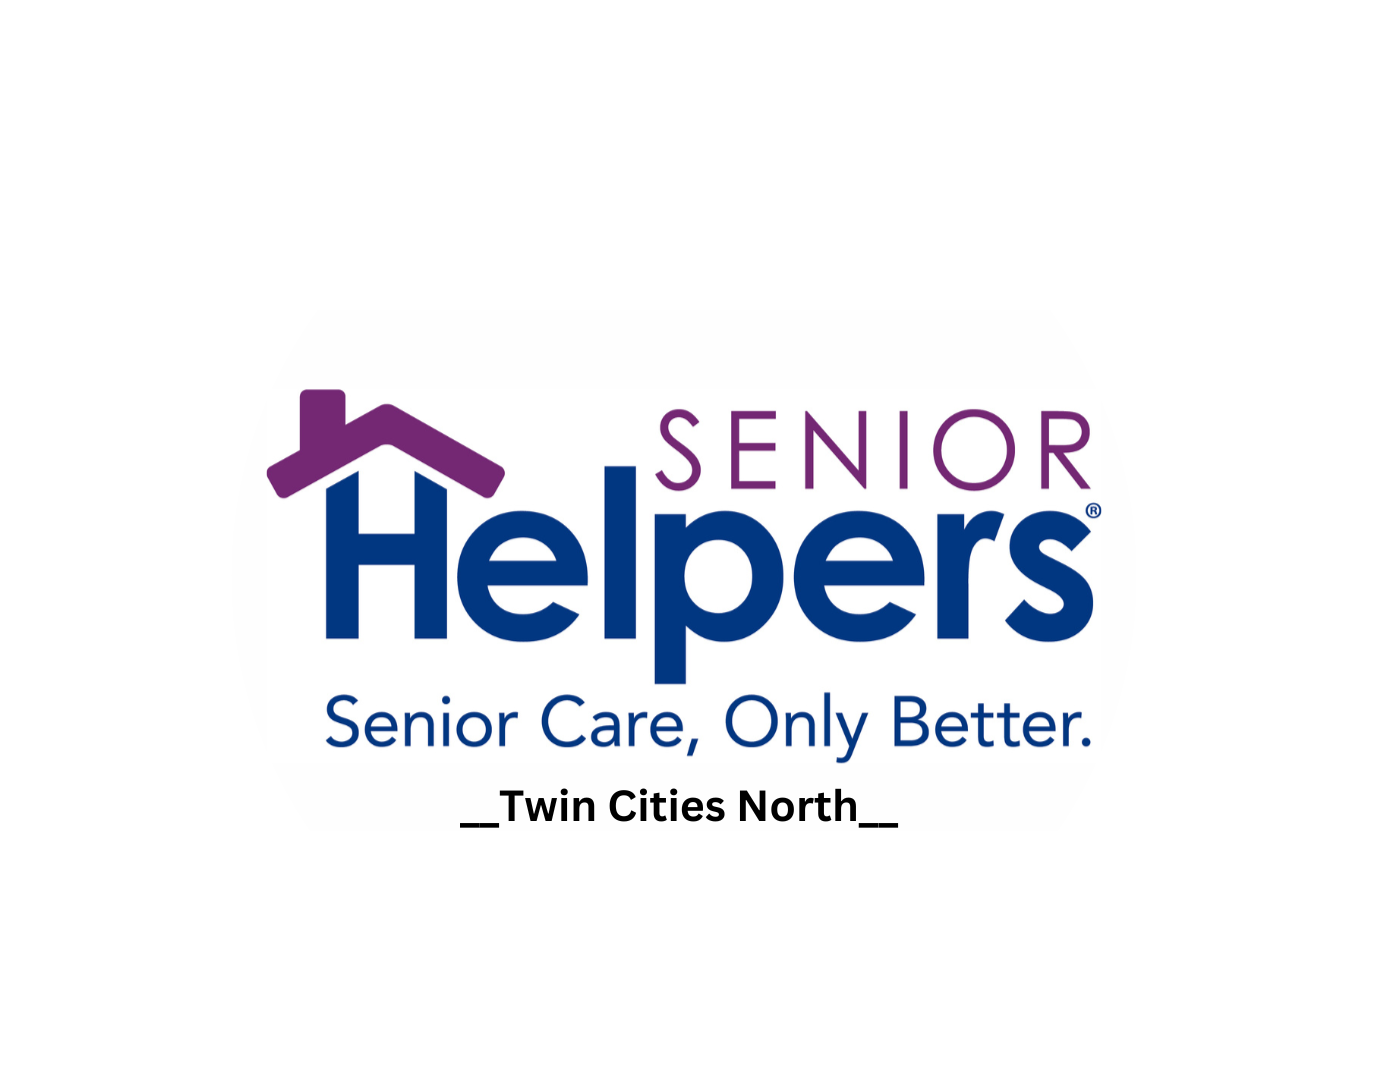 Senior Helpers Twin Cities North image